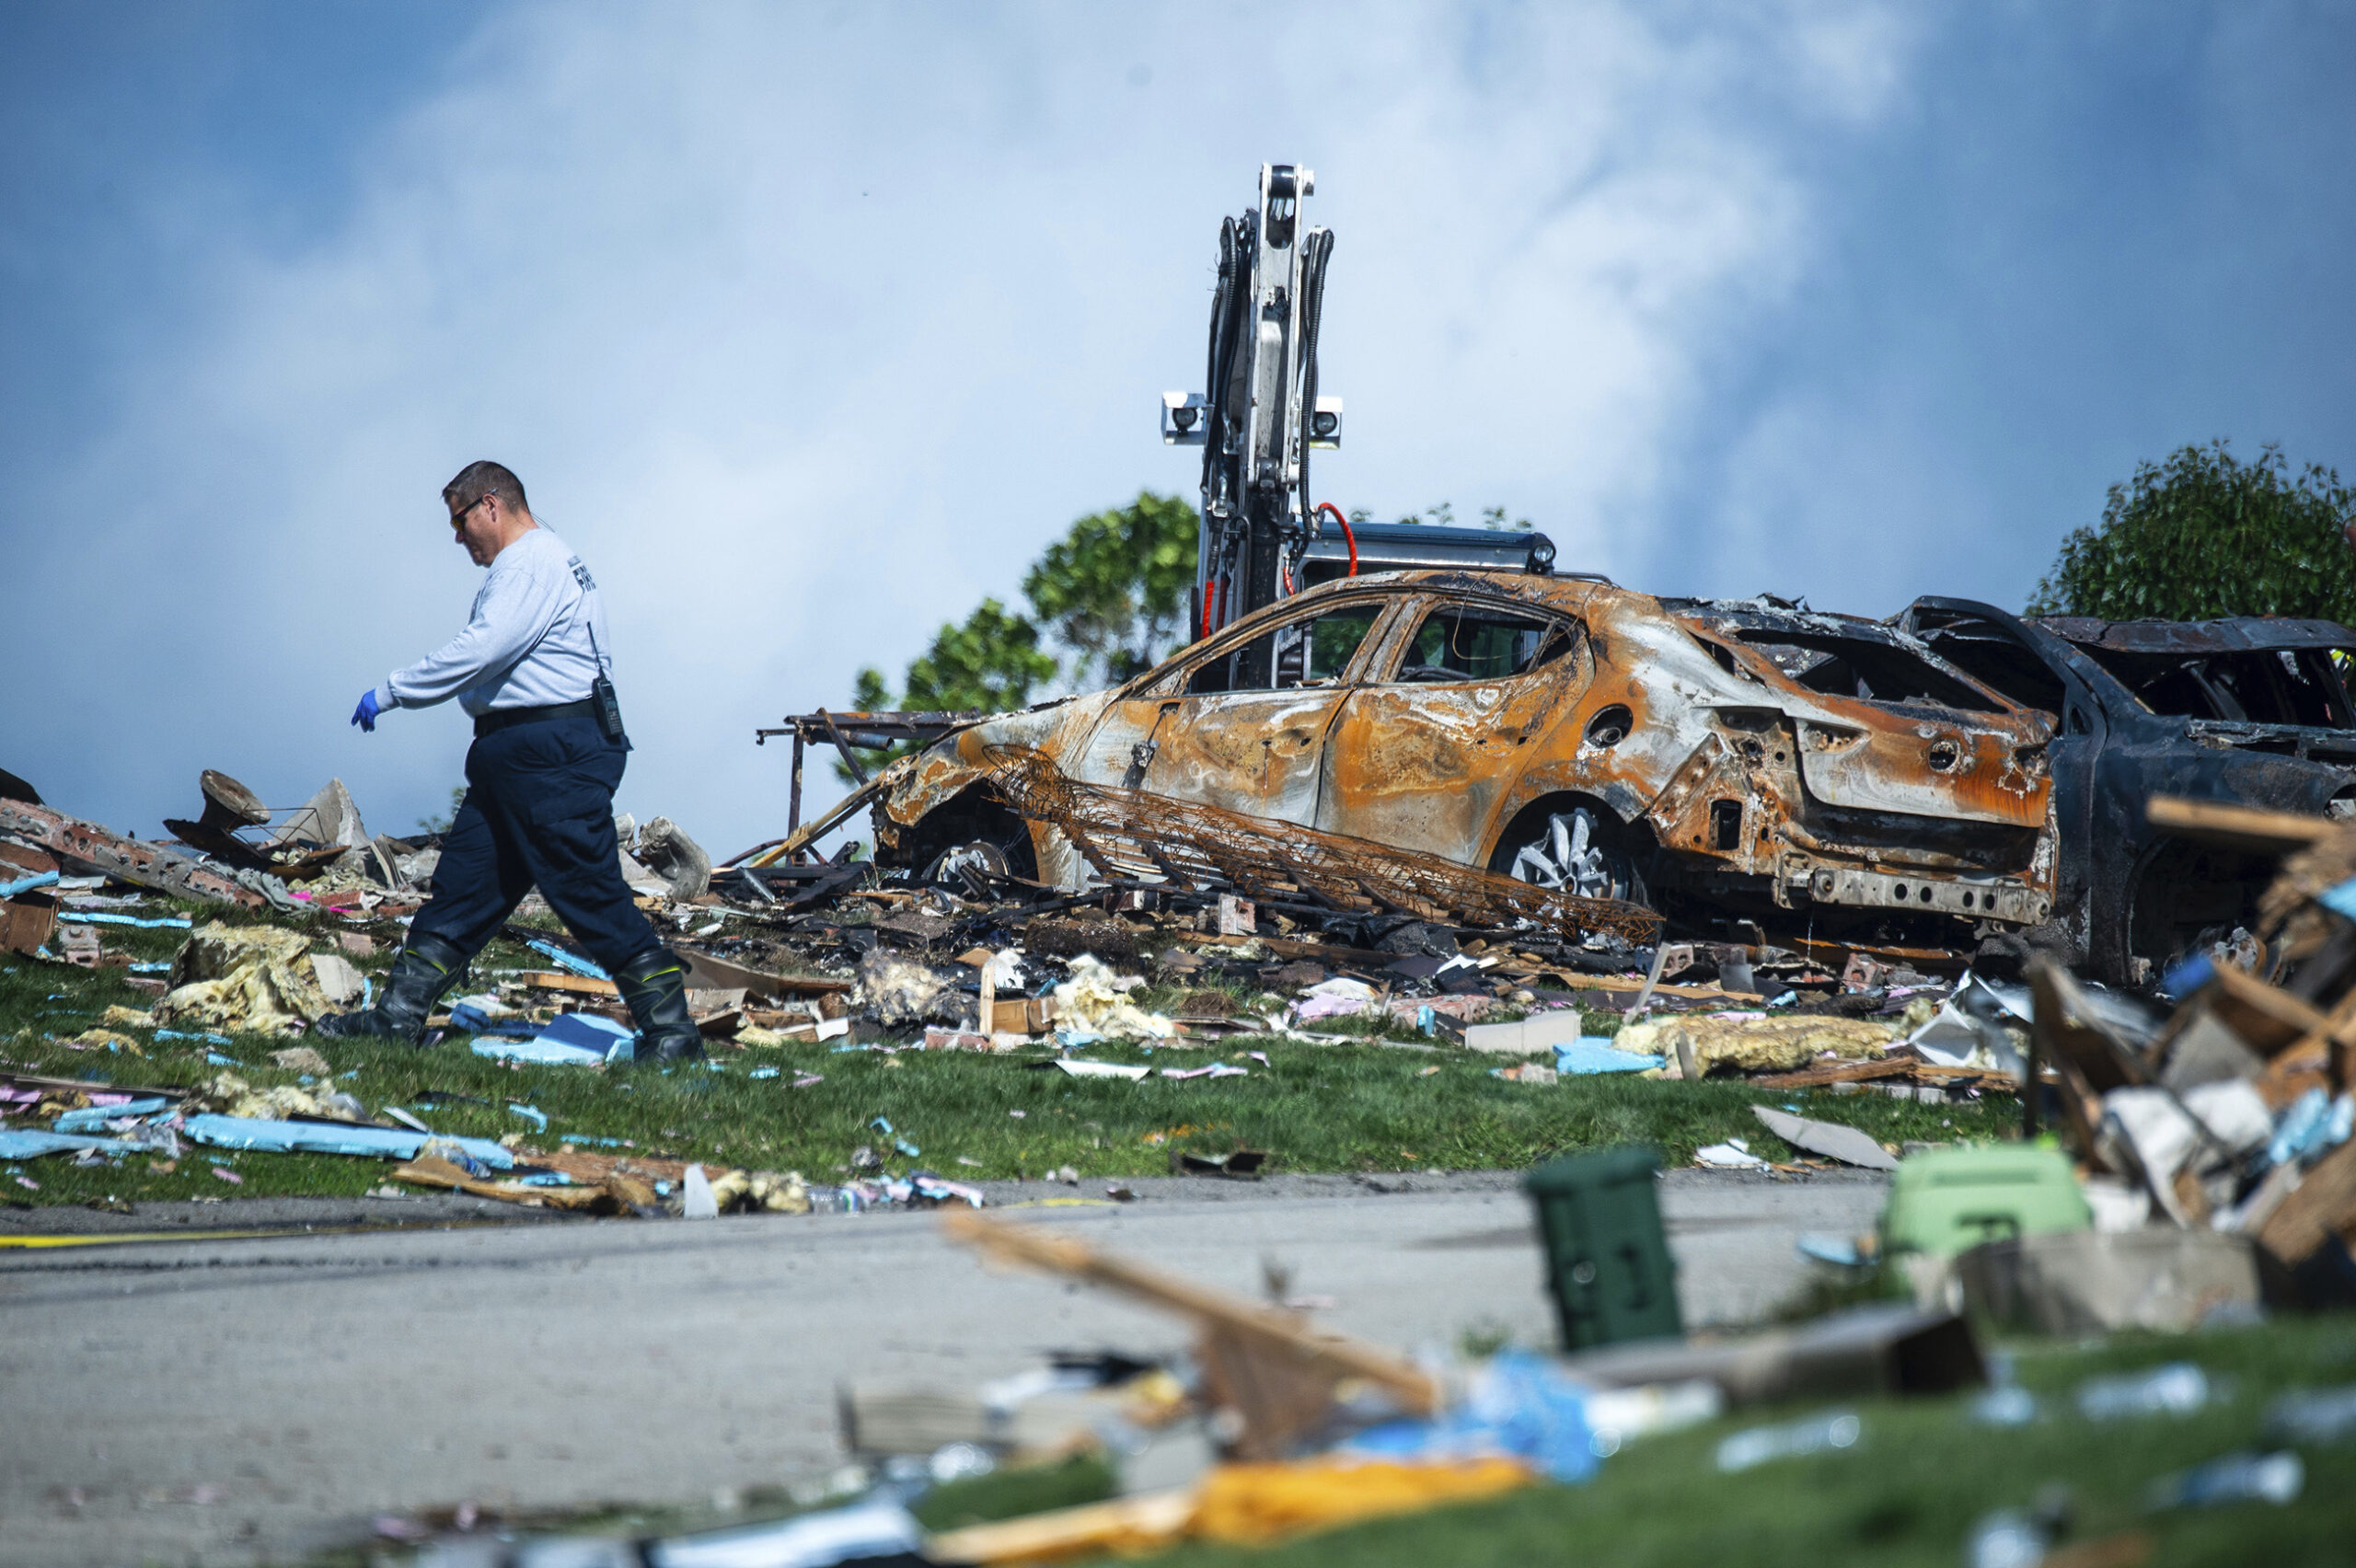 An investigator walks through the debris from a home explosion which occurred the day before in Plu...